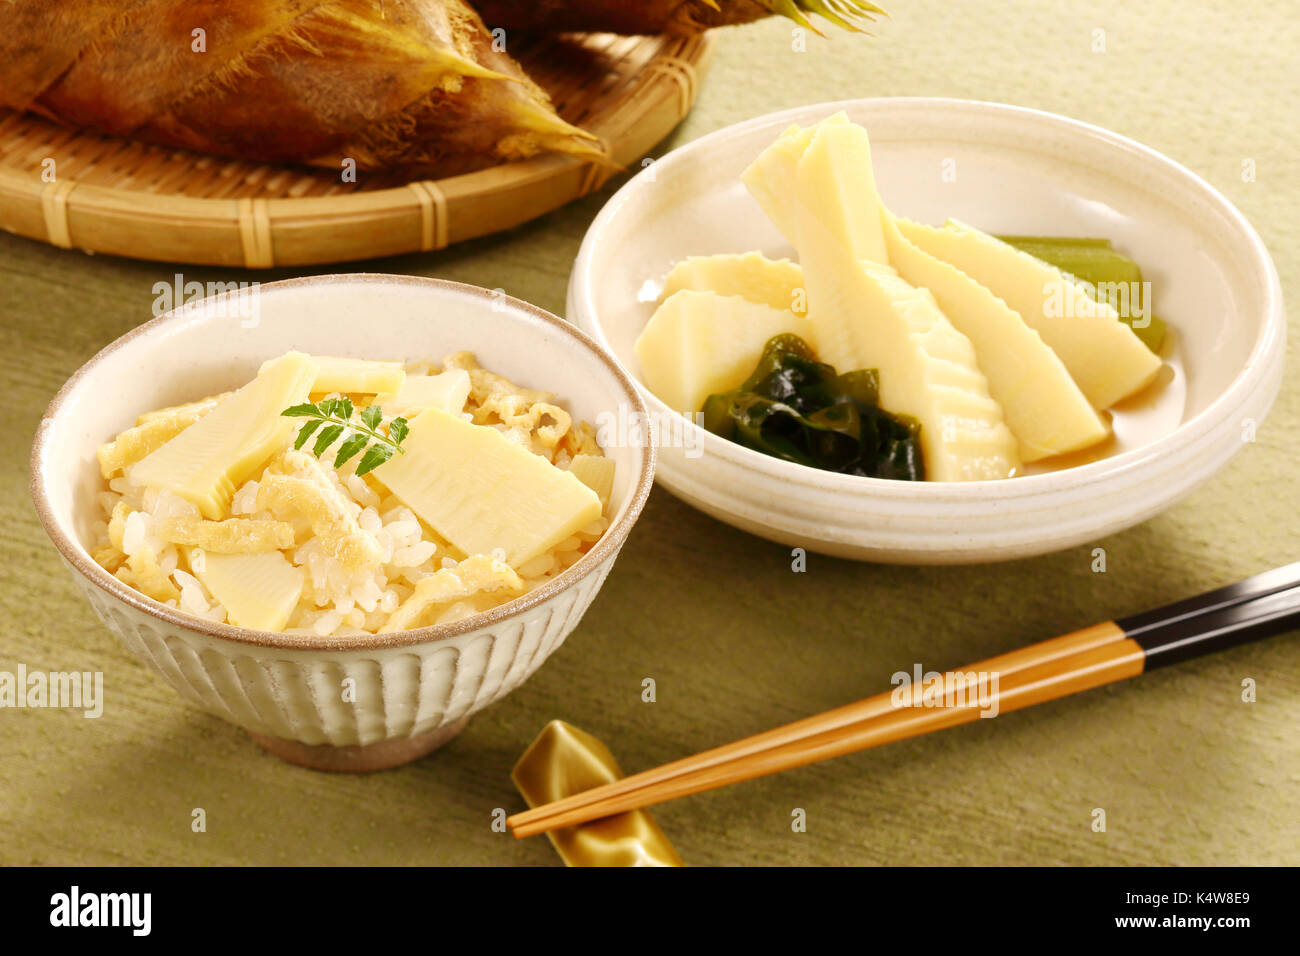 Bamboo sprouts on rice Stock Photo